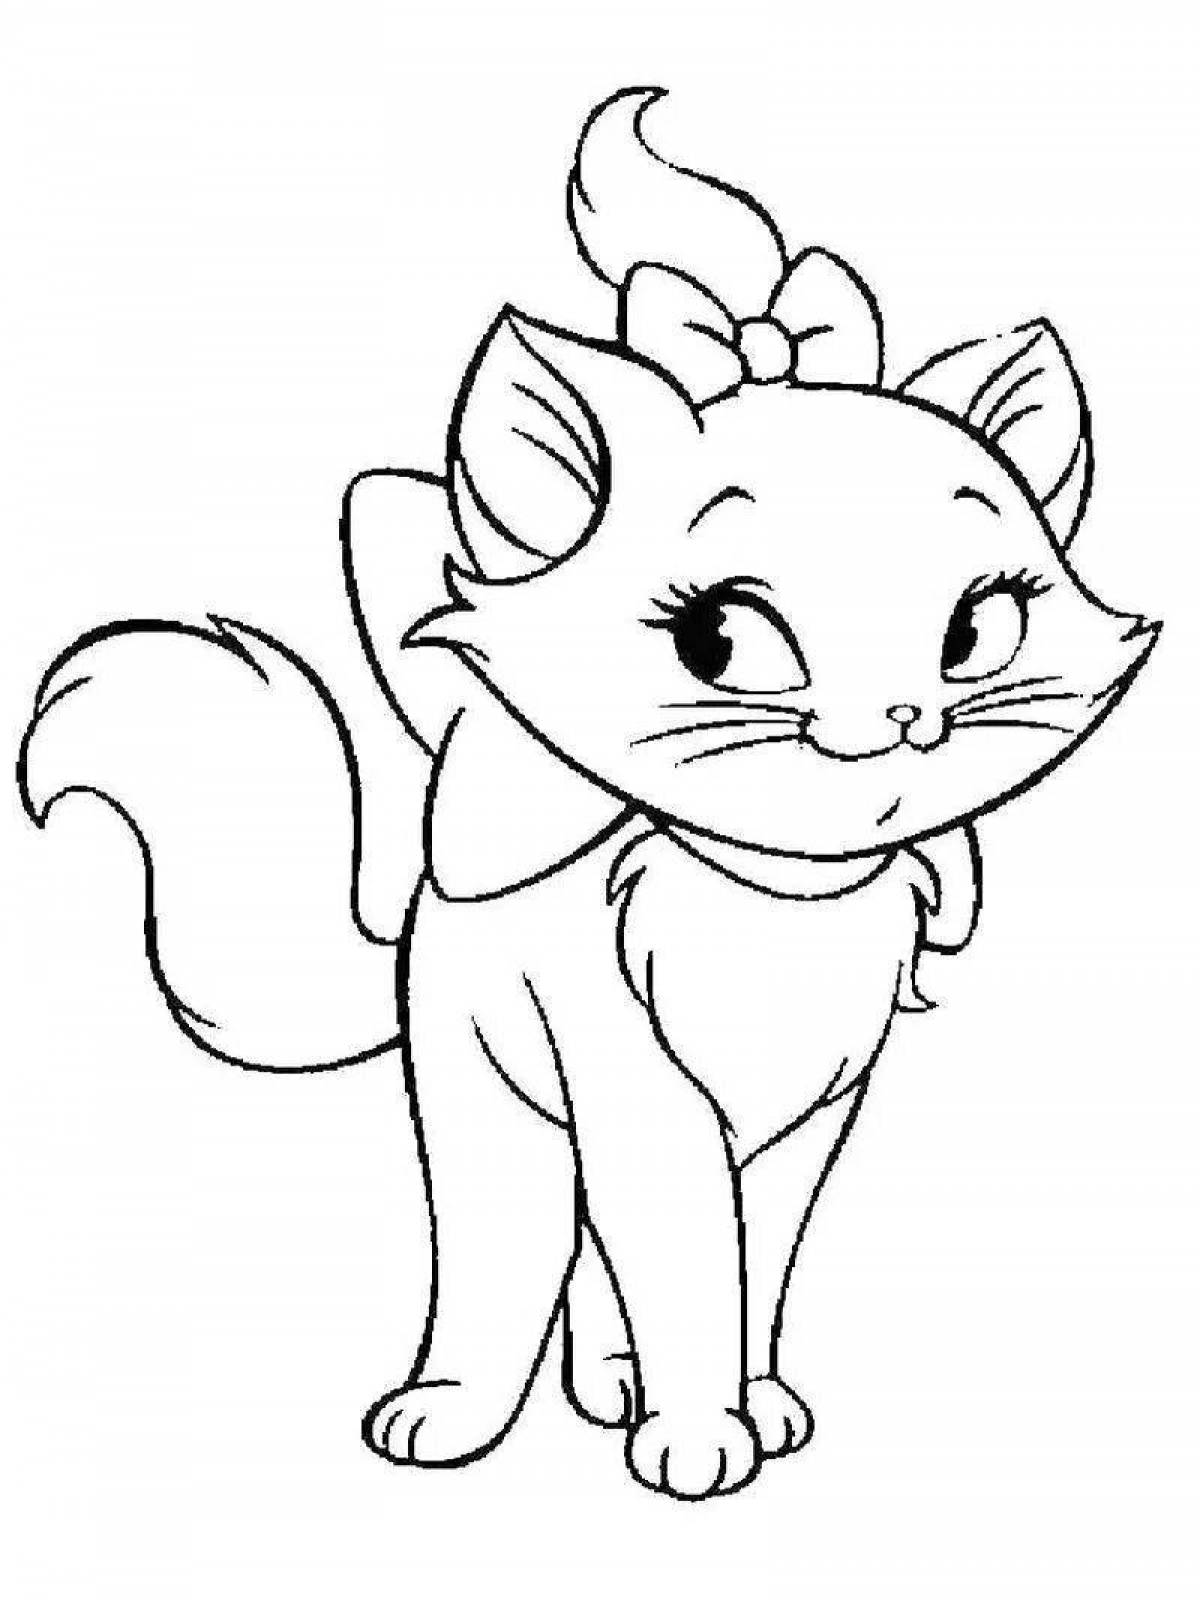 Coloring book dreamy little kitty